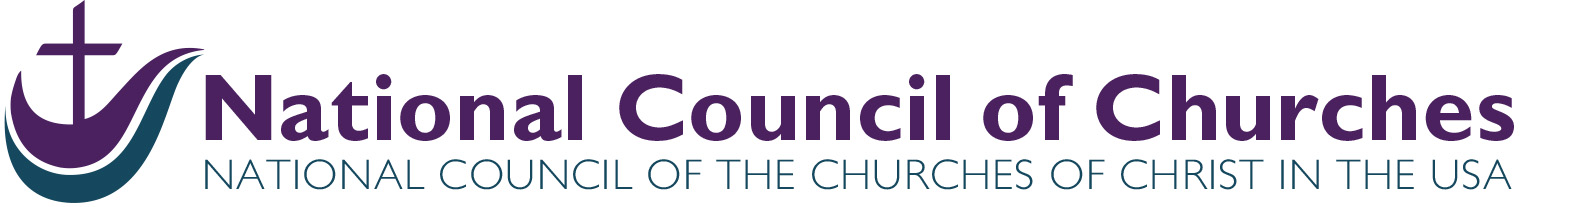 National Council of Churches Newsletter